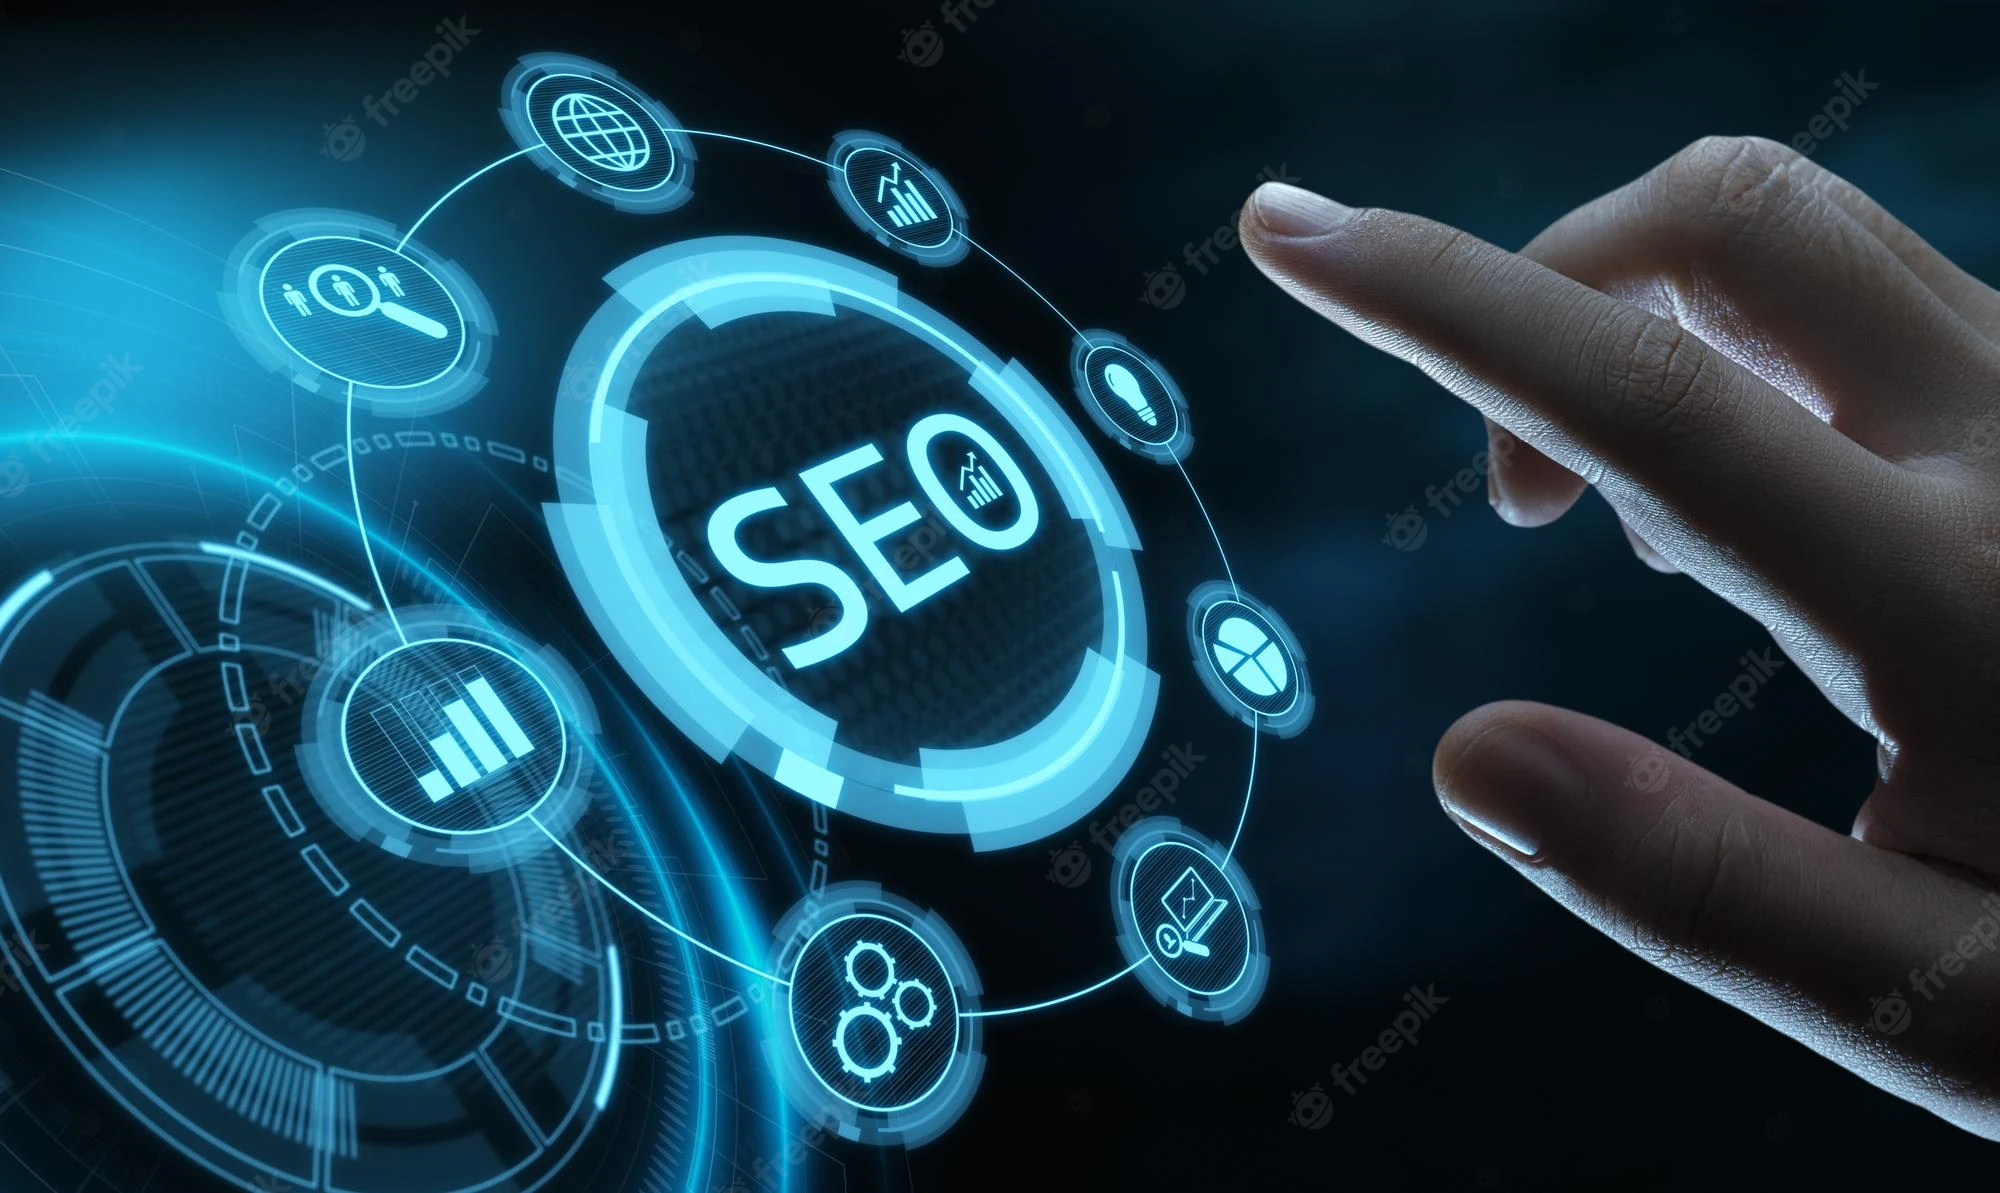 What is Website SEO?